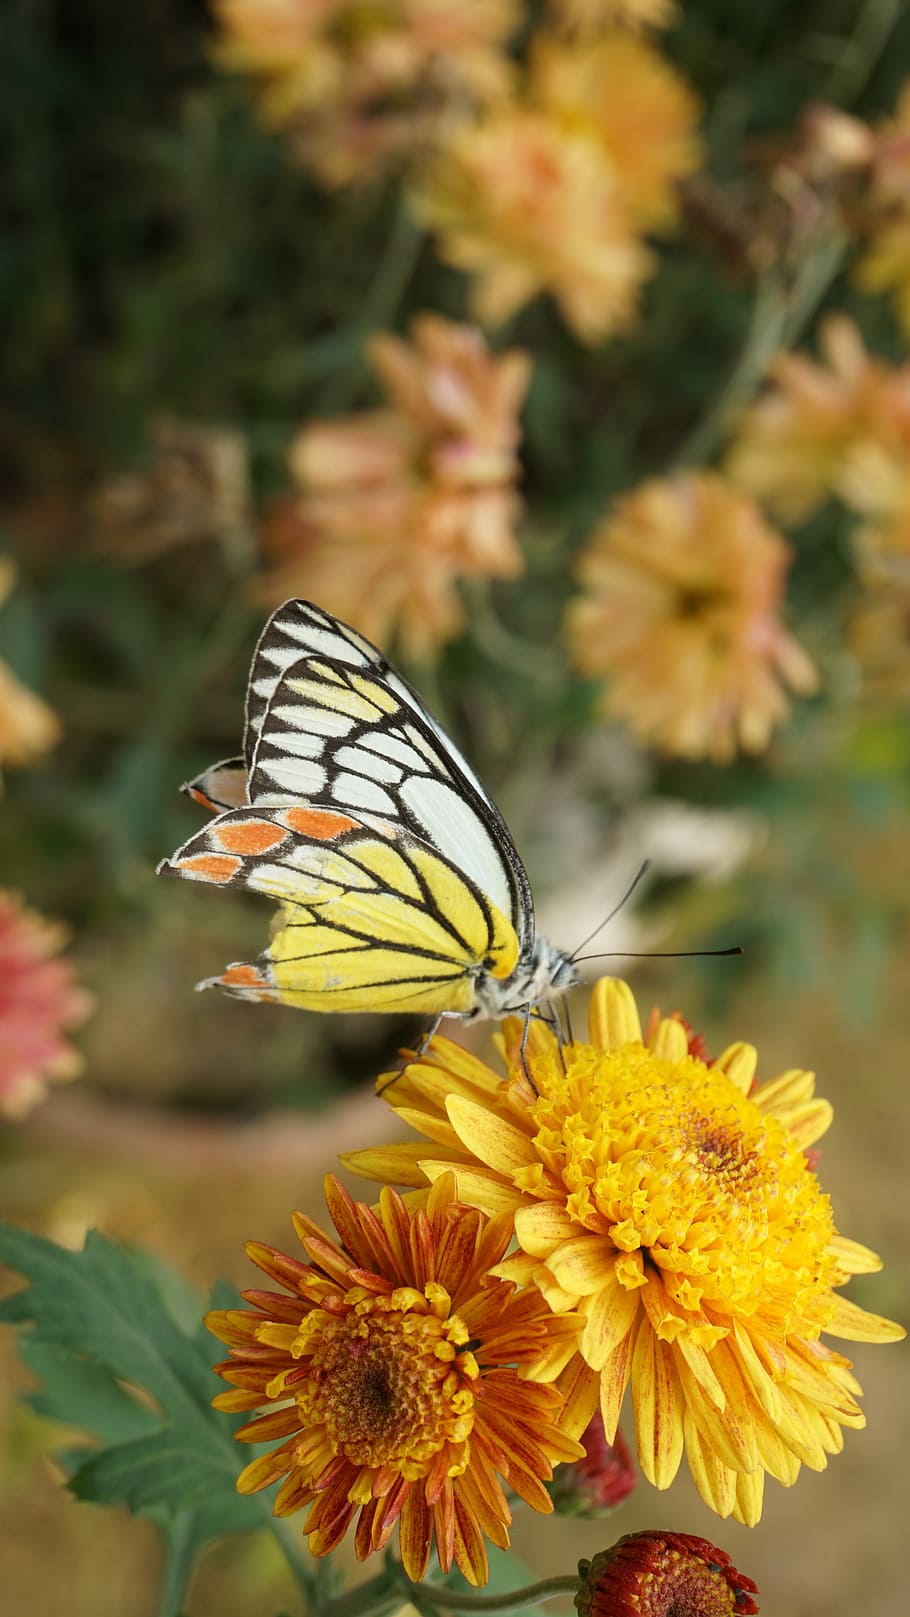 Butterfly, Blooming, Flower, floral, blossom, garden, nature